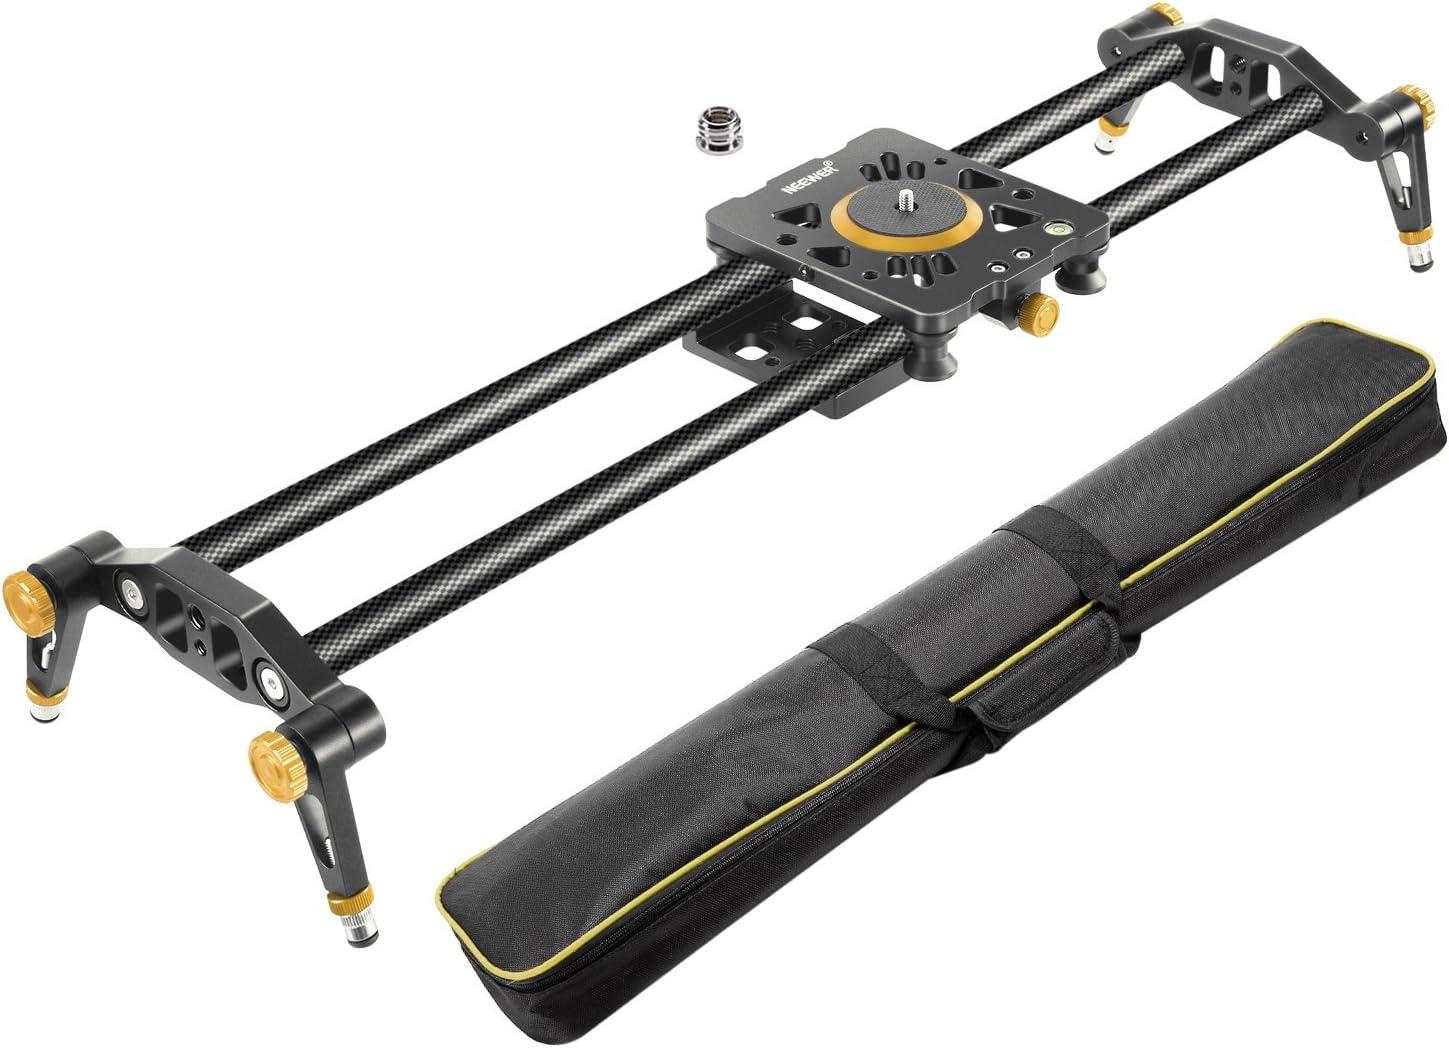 NEEWER 39.4 inches/100 Centimeters Carbon Fiber Camera Slider Video  Stabilizer Rail with 6 Bearings for DSLR Camera DV Video Camcorder Film  Photography, Load up to 17.5 pounds/8 kilograms 100cm